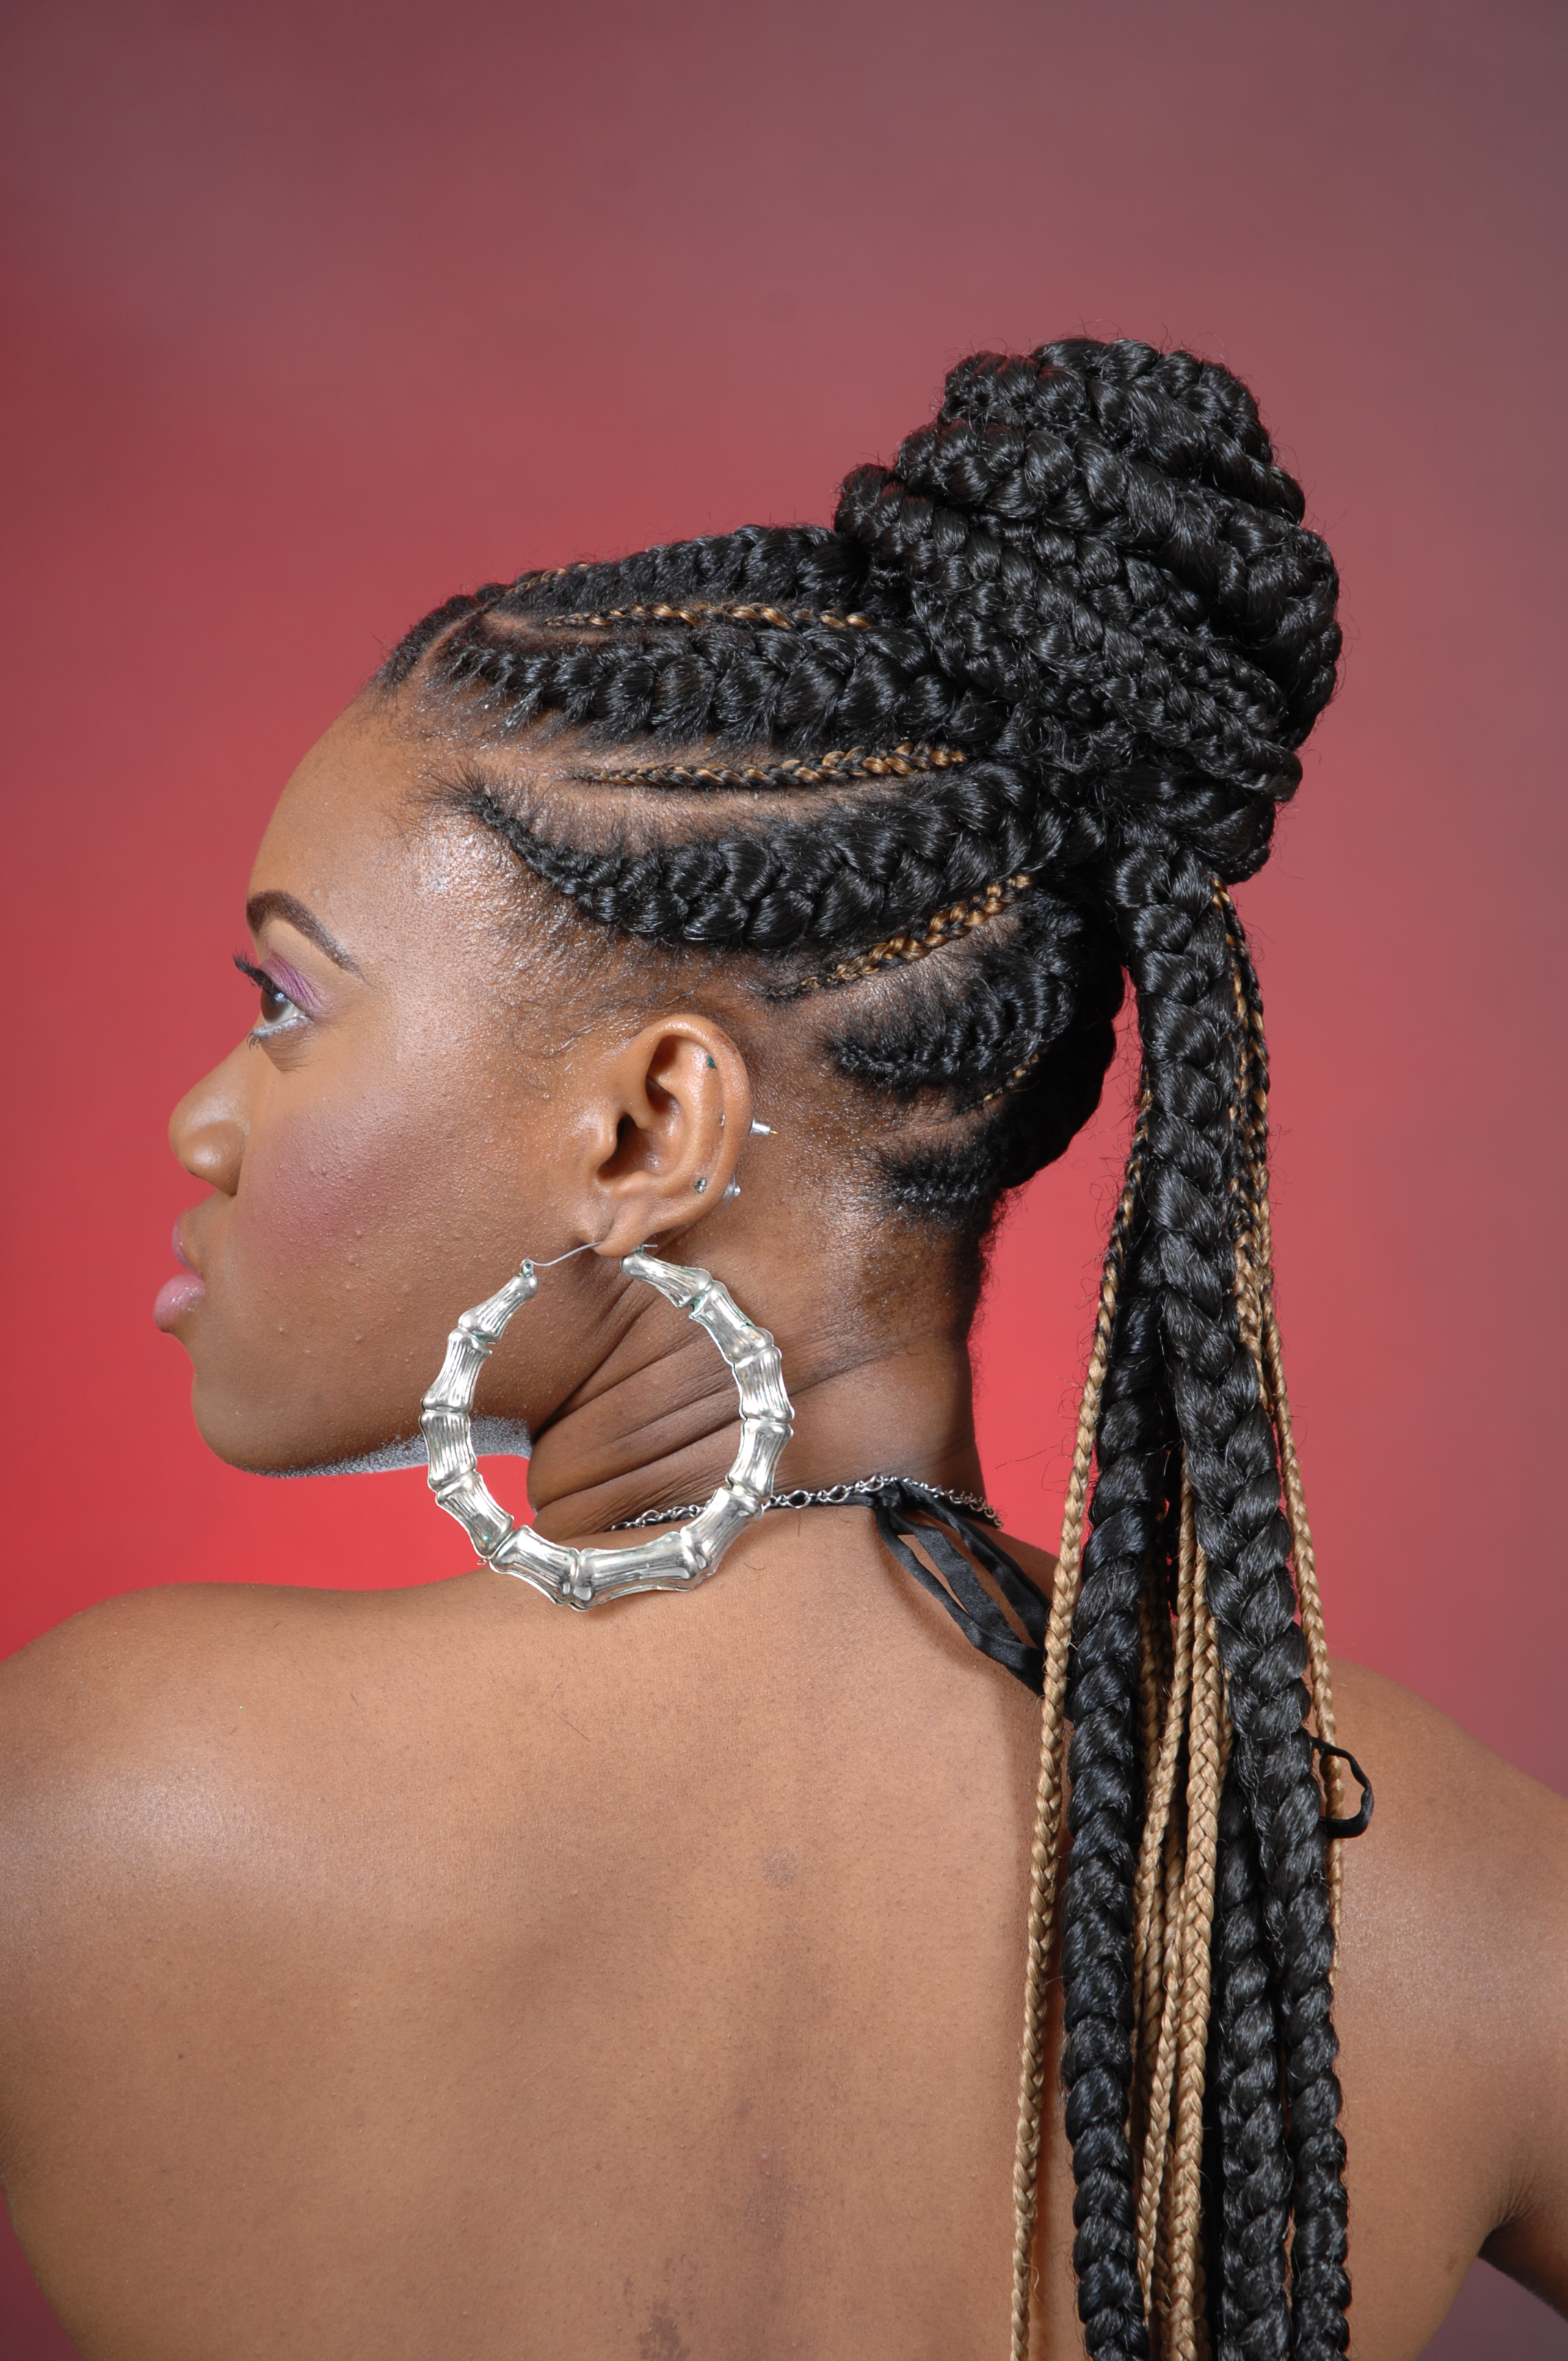 Best African Braids Hairstyle You Can Try Now - Fave ...